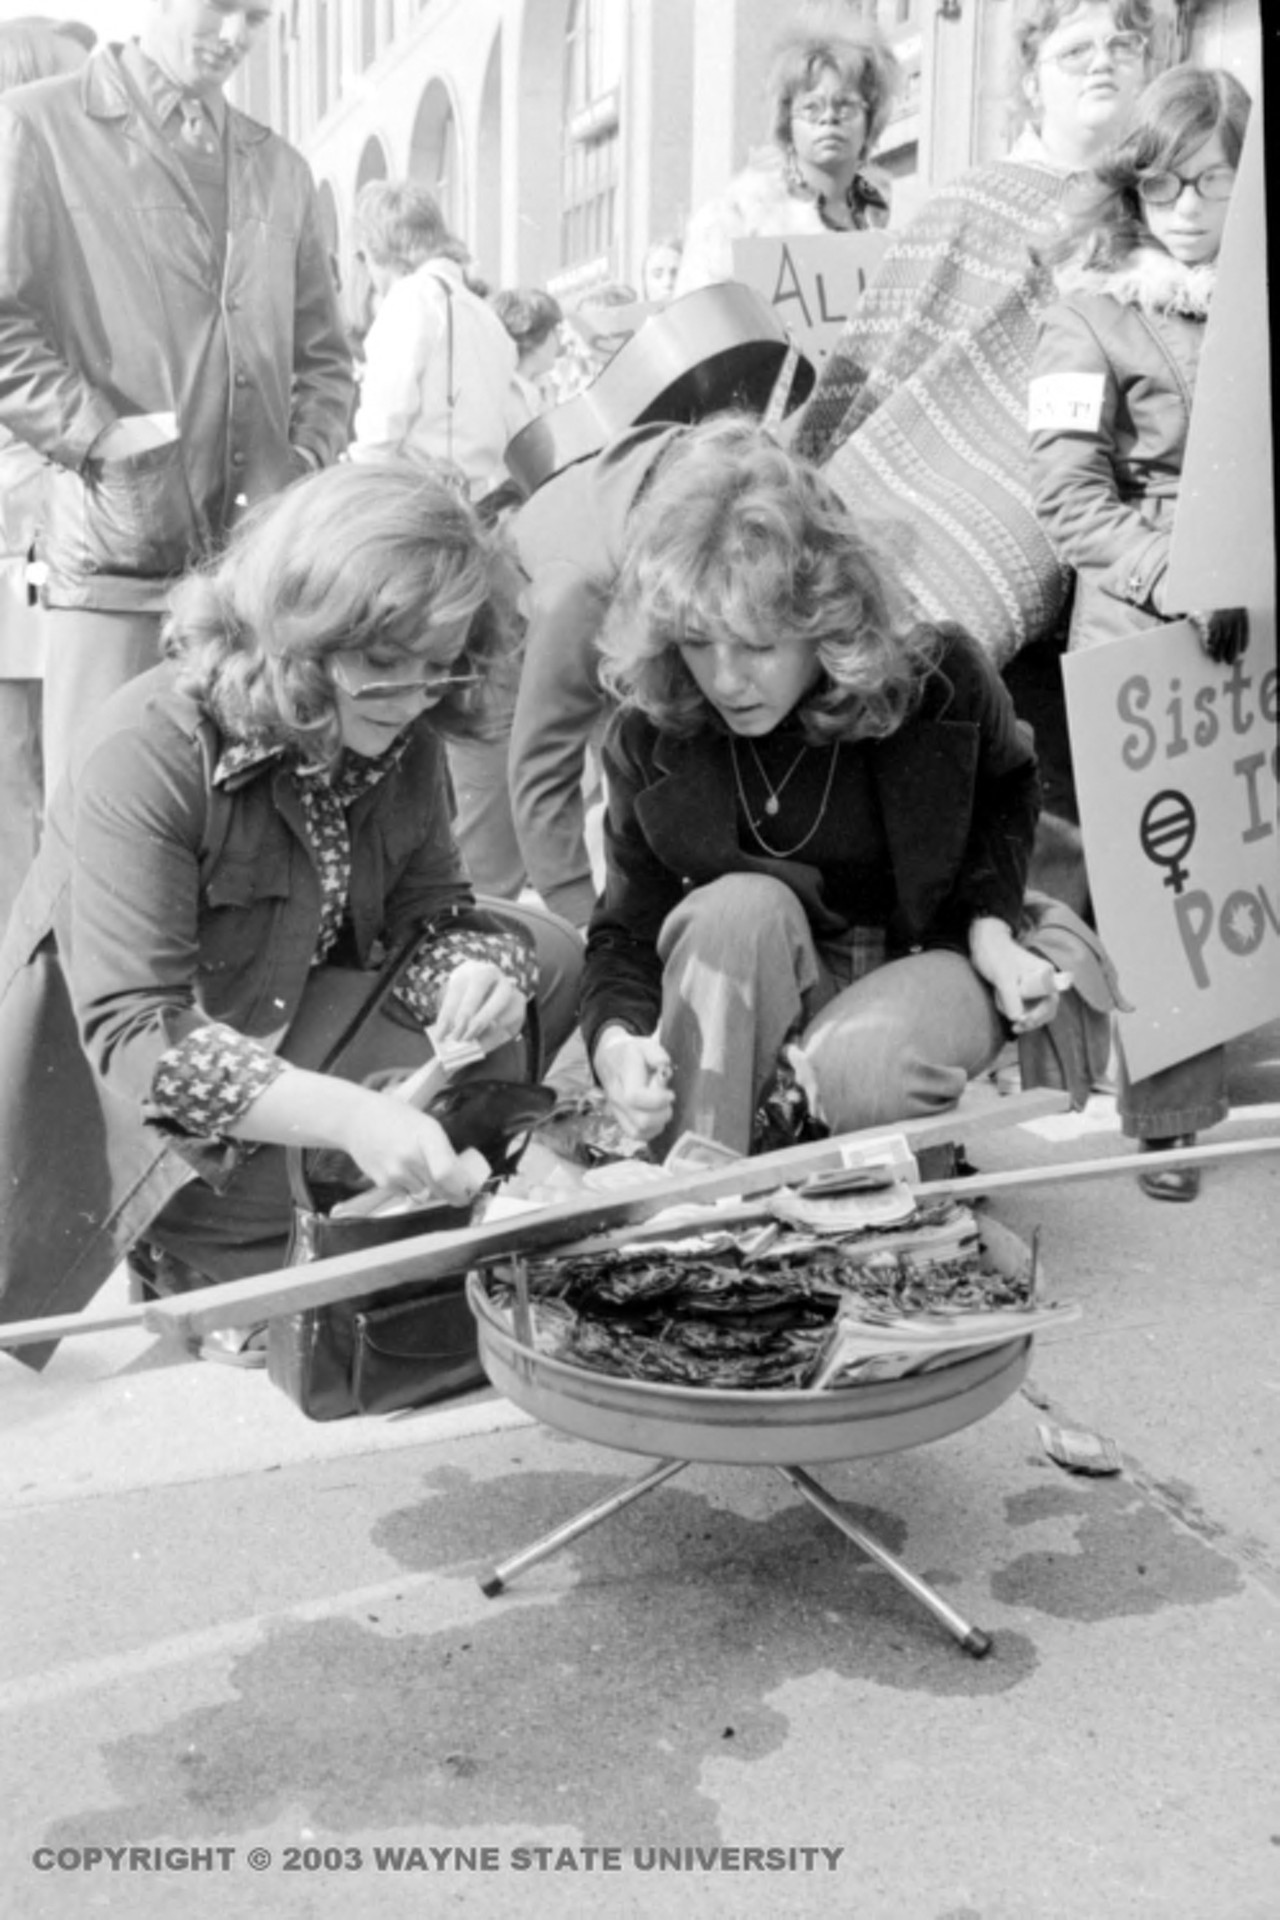 1970s | Two women attempt to light magazines and other materials on fire inside hibachi, at a one day work stoppage organized by the National Organization for Women called Alice Doesn't Day, to draw attention to the work that women perform in society, with women carrying signs behind them.